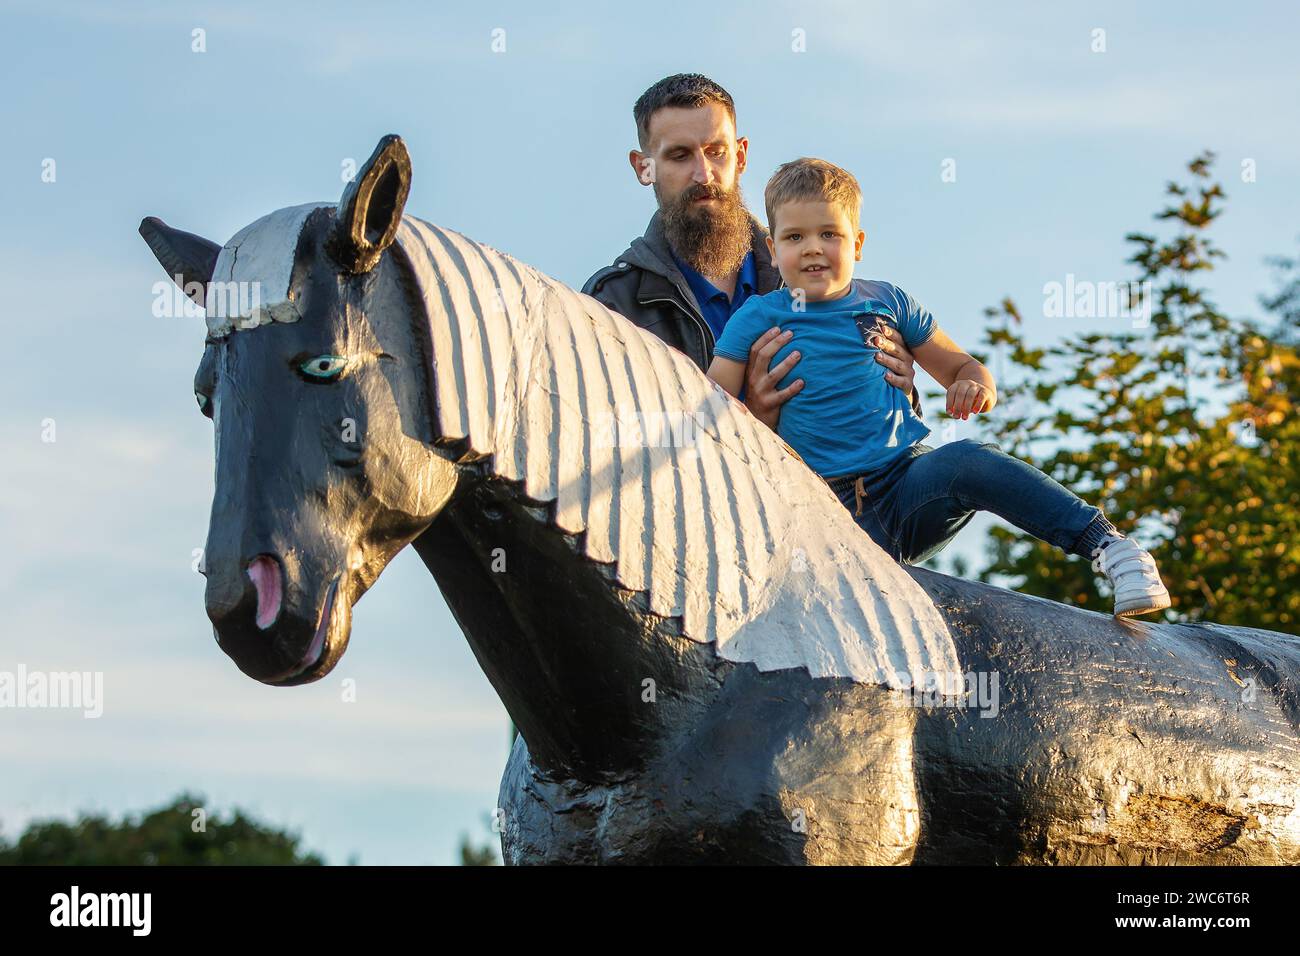 Father put up his son he helps him climb onto the large horse figure in the outdoor park Stock Photo